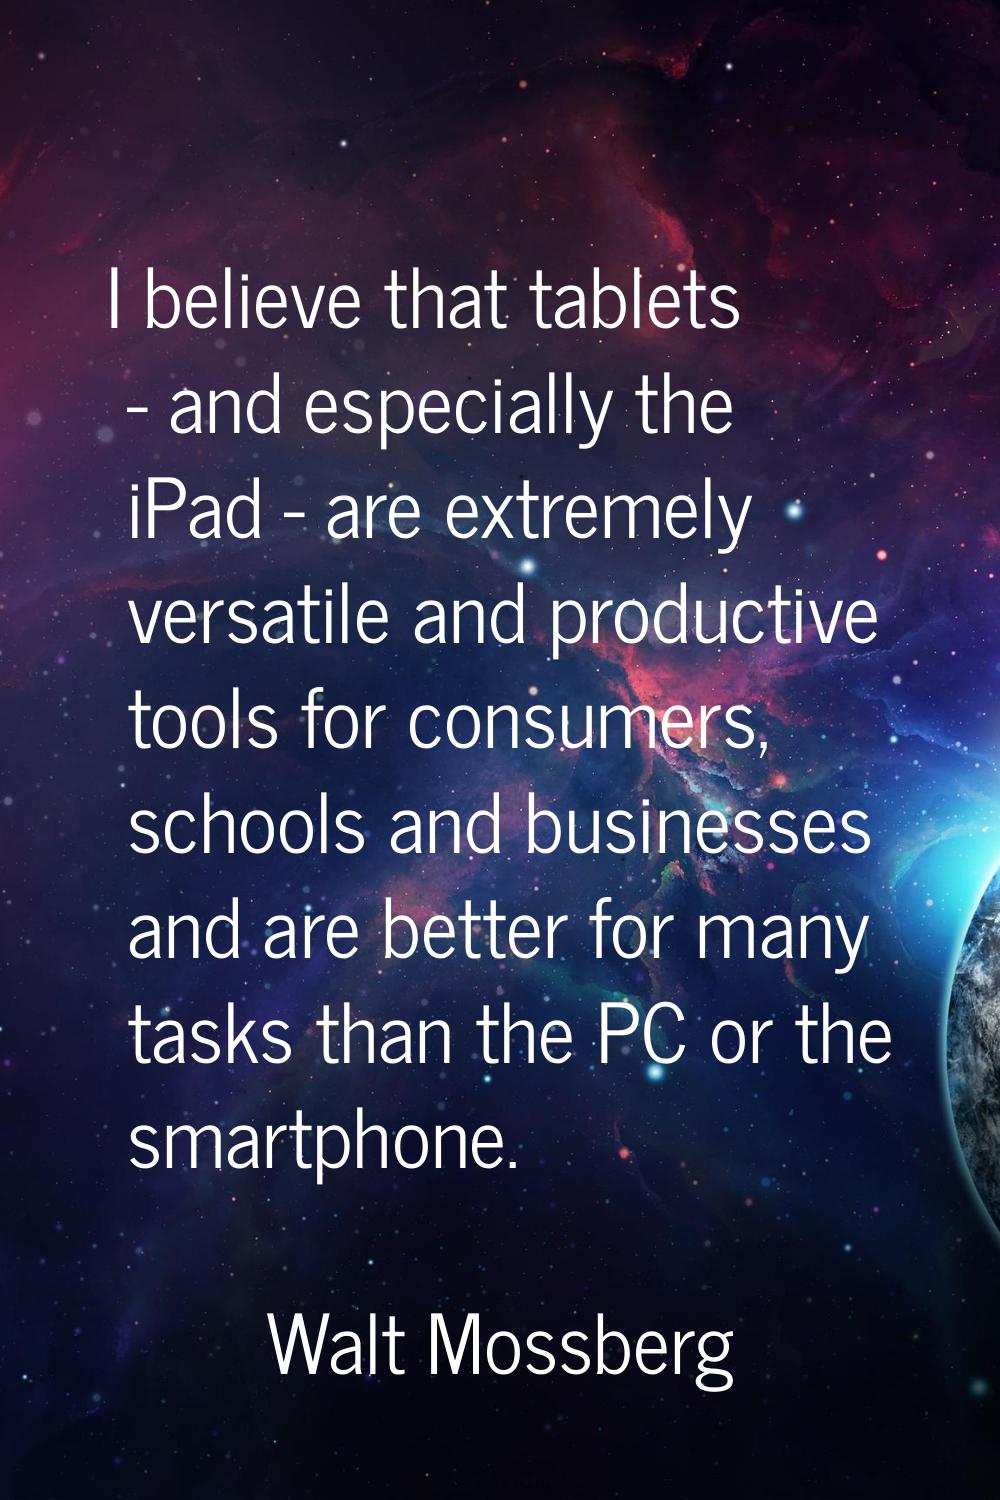 I believe that tablets - and especially the iPad - are extremely versatile and productive tools for